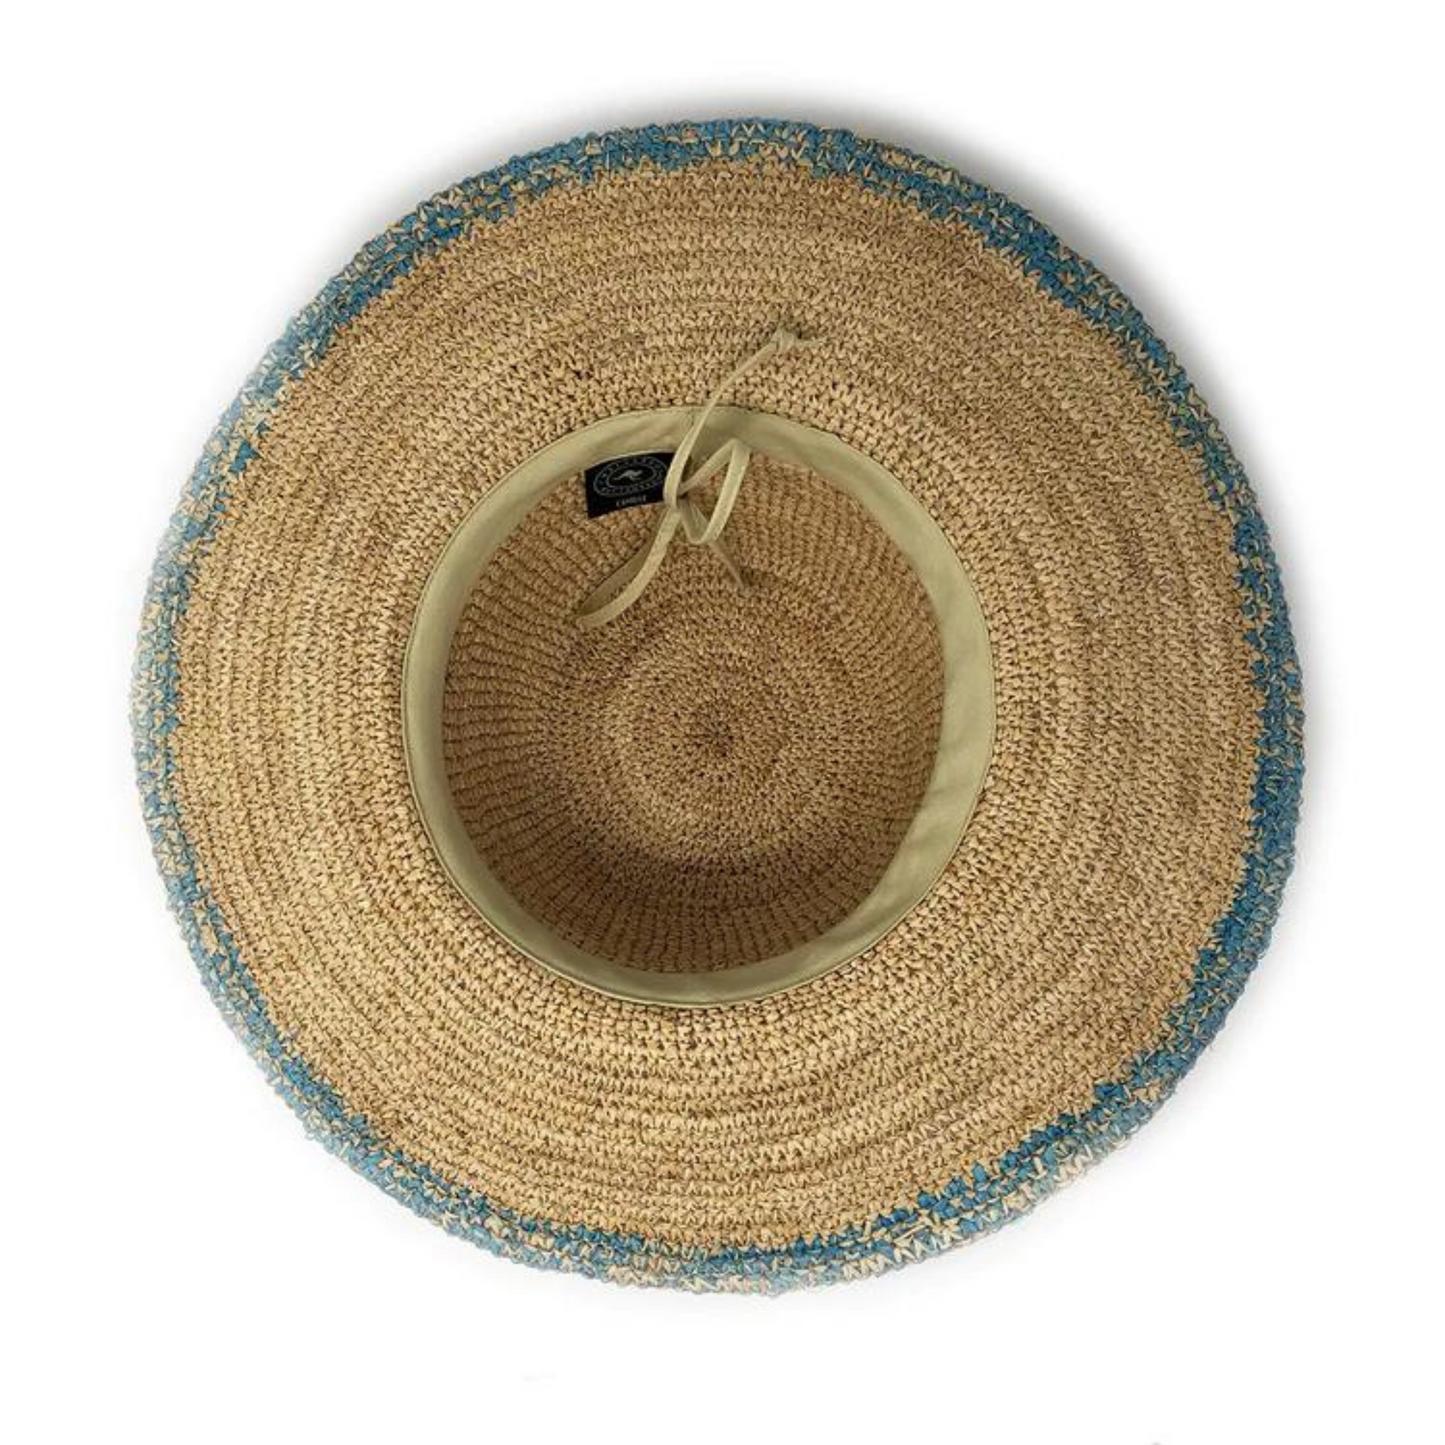 The underneath of a hat is pictured with ombré turquoise brim on edge to natural tan weave. The inner of the crown has a band of tan fabric that cases an adjustable string.